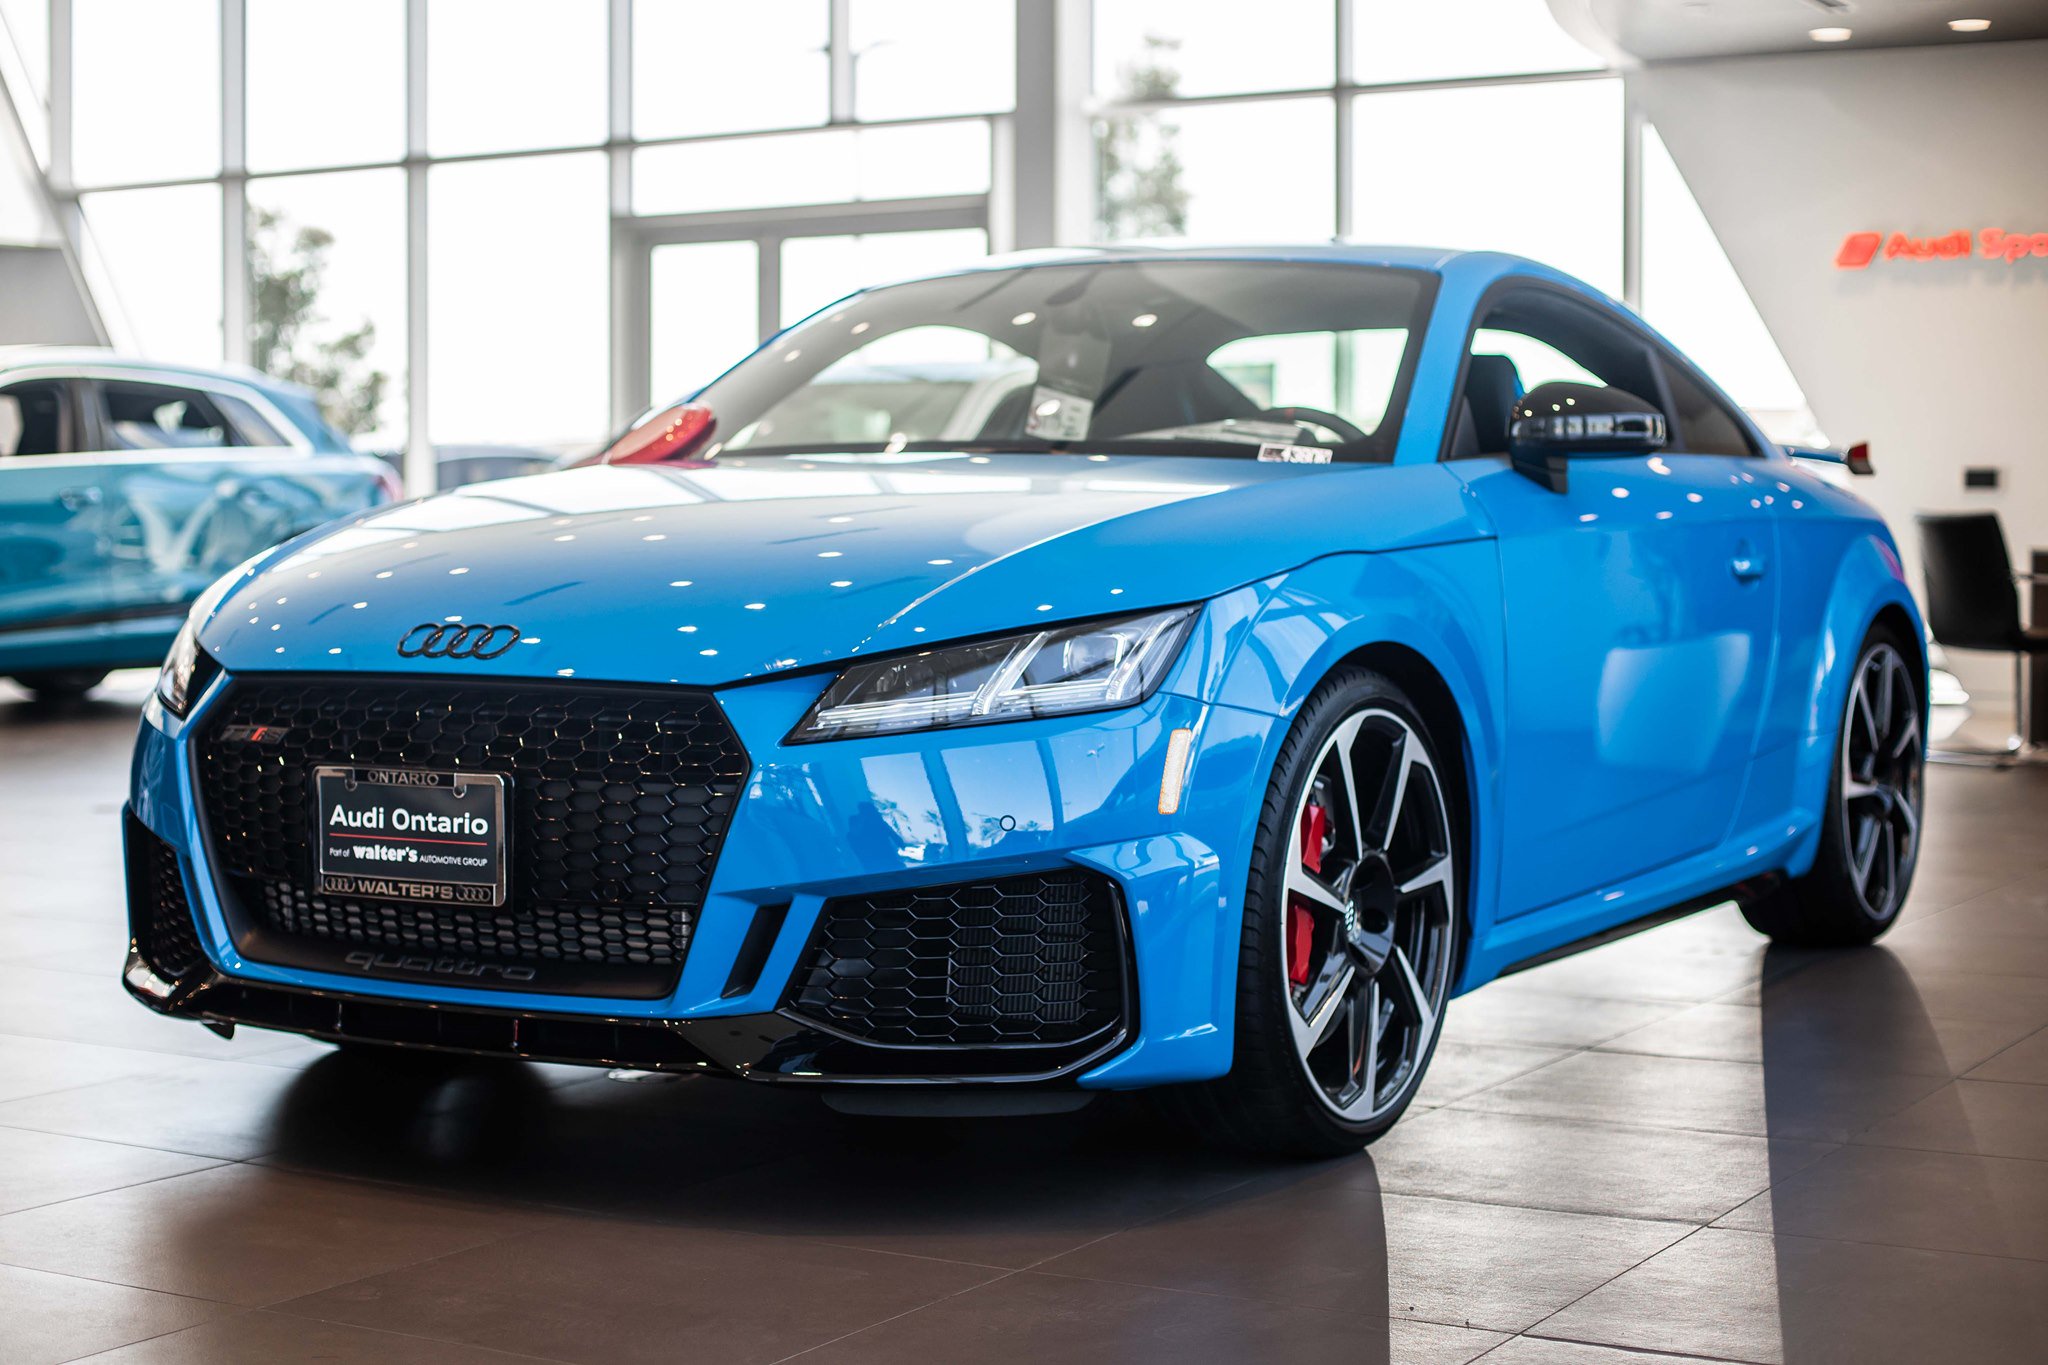 Audi Ontario on Twitter: "The 2019 #Audi TT RS 2.5T Coupe in Turbo Blue  delivers 394 hp and 354 lb-ft of torque to all four wheels, going from 0-60  mph in only